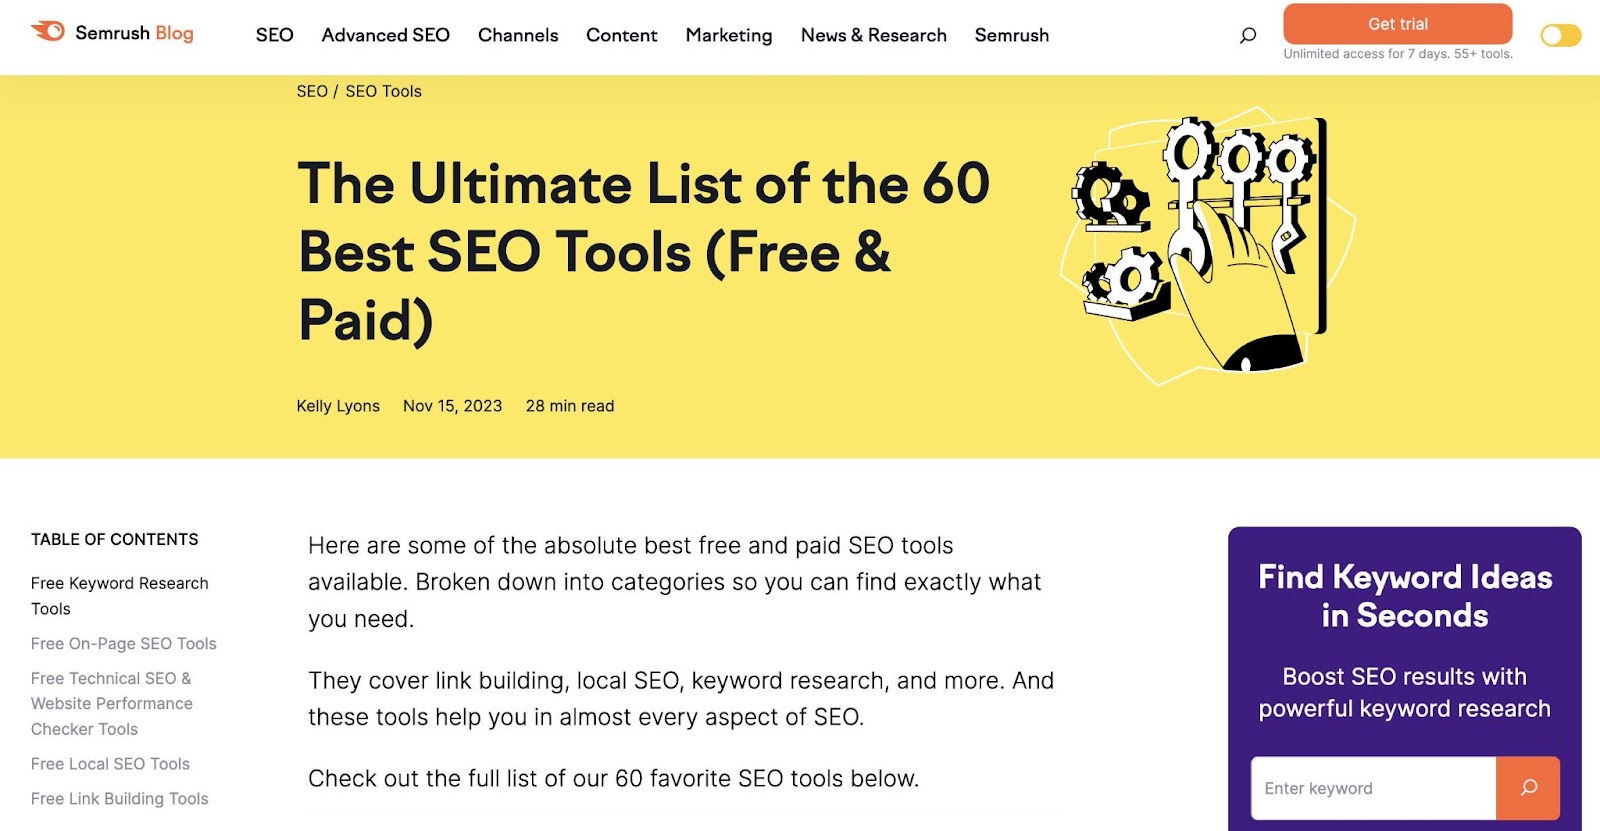 Semrush's blog on the best free and paid SEO tools landing page